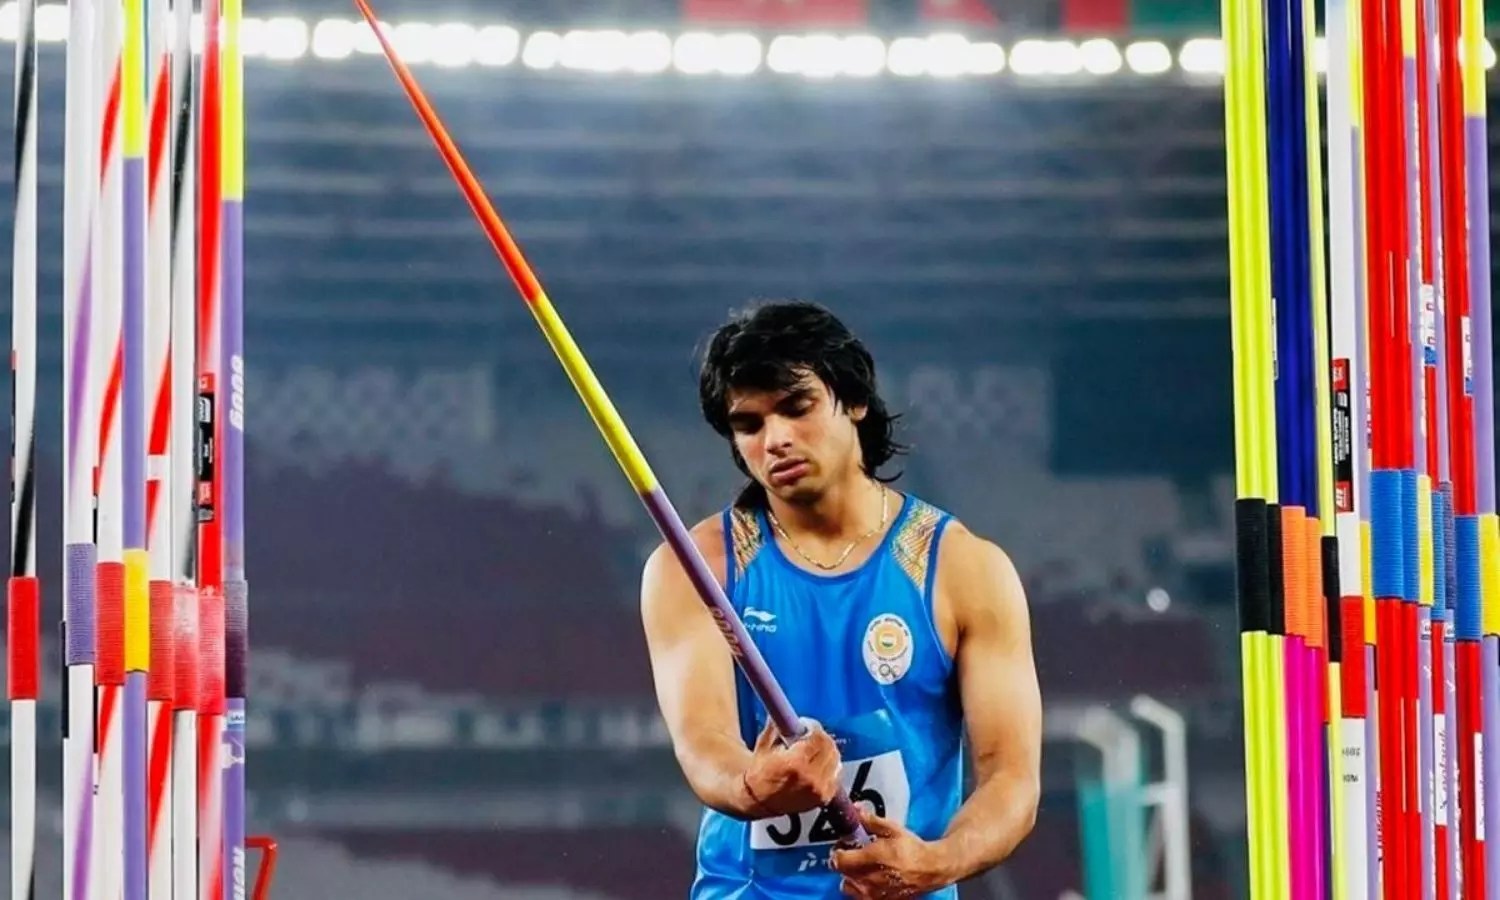 Neeraj Chopra World Athletics LIVE: All you want to know about India ace Neeraj Chopra’s chances in JAVELIN THROW competition of World Championship, main competitors, event timings & live streaming details